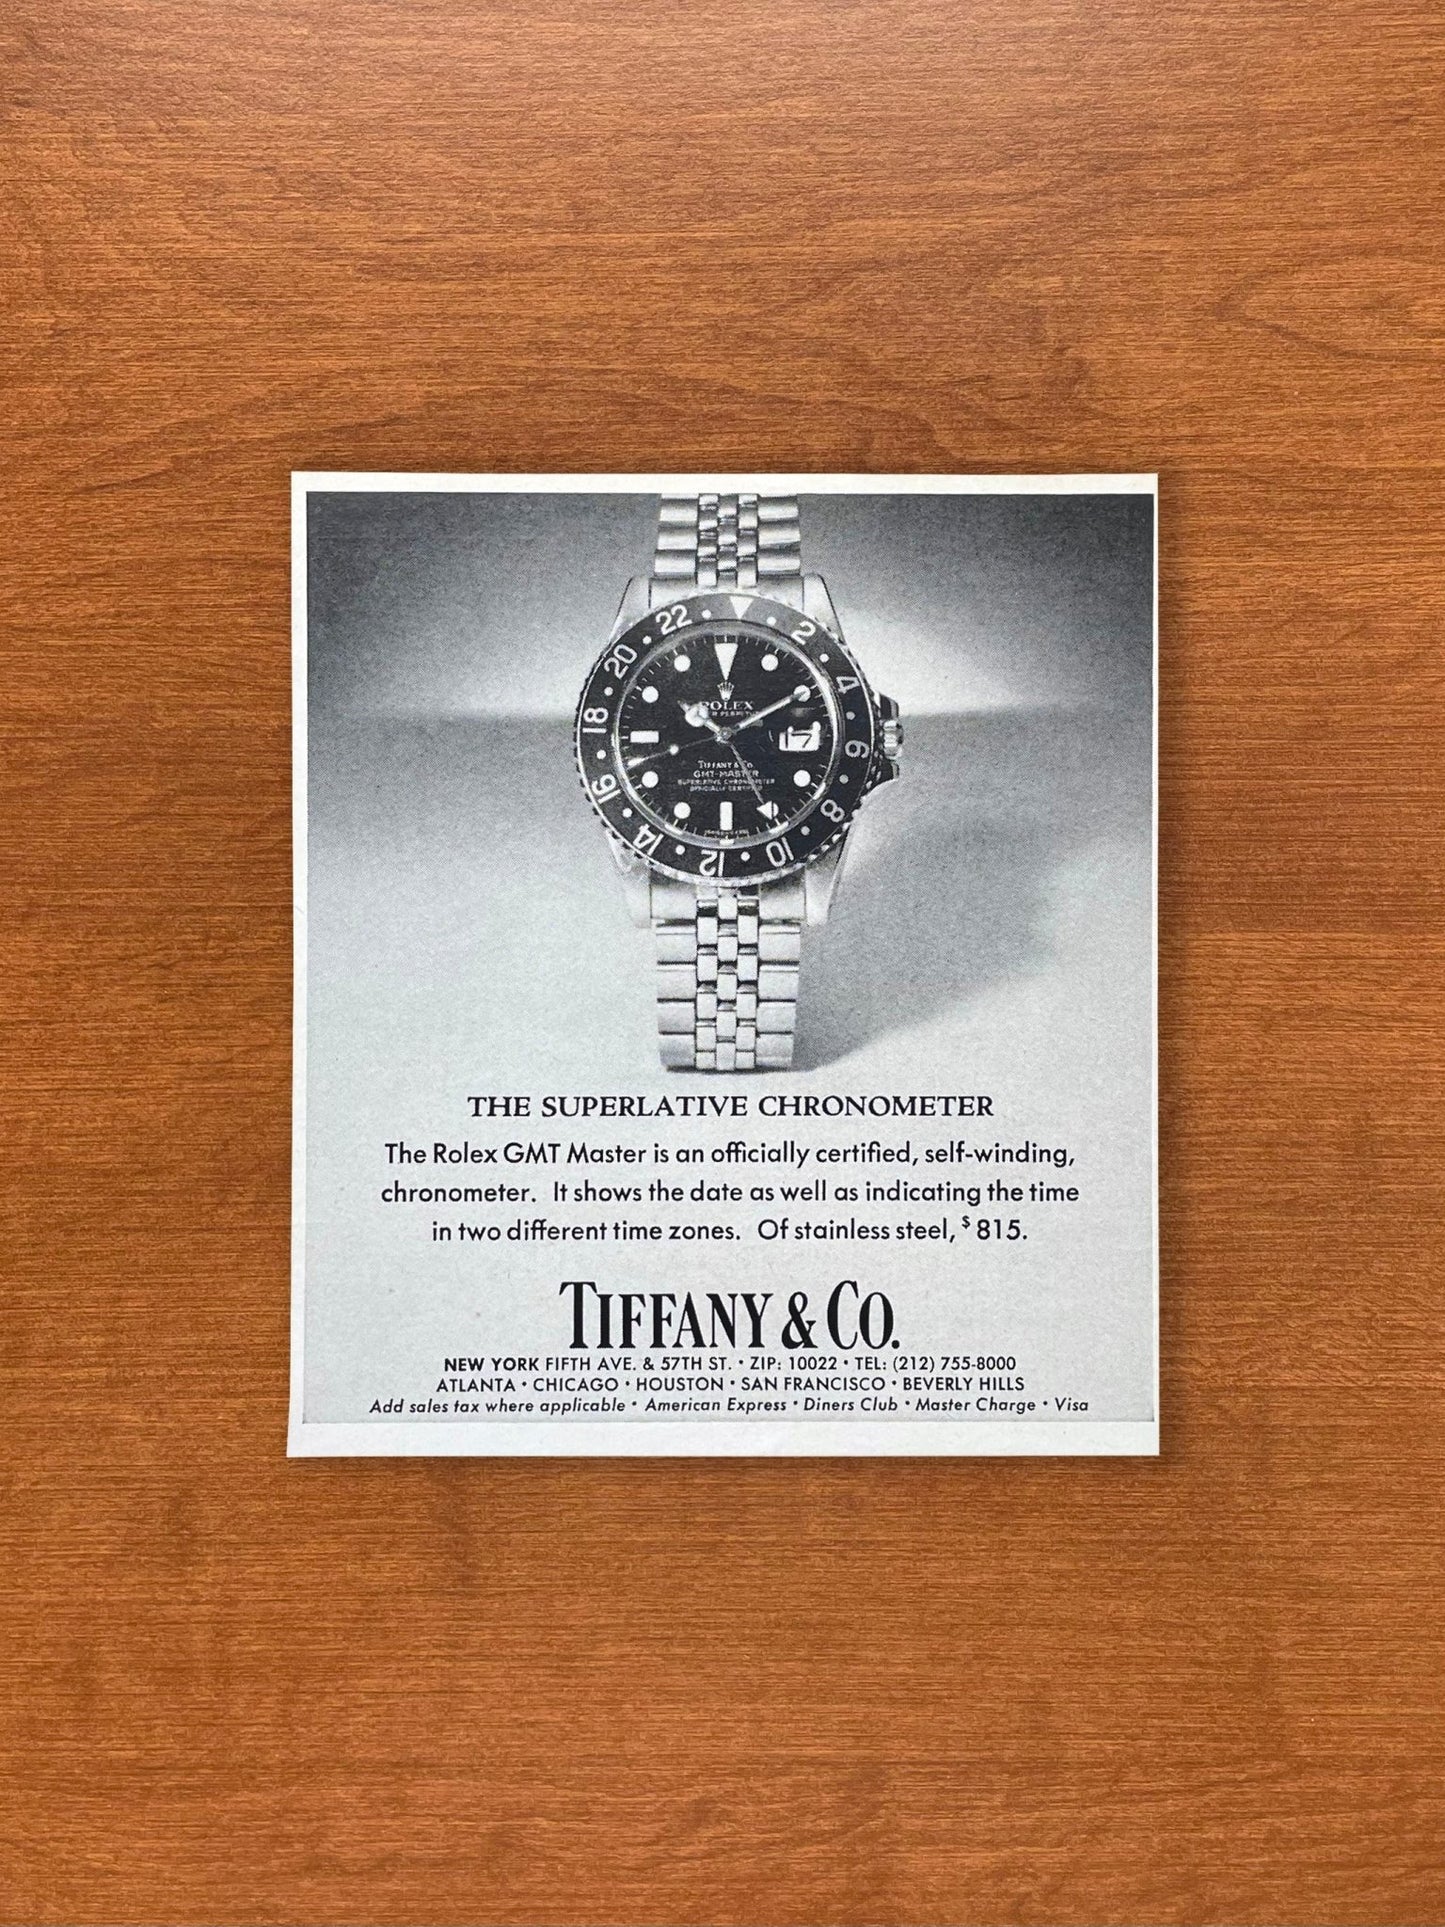 1978 Rolex GMT Master Ref. 1675 at Tiffany & Co. Advertisement